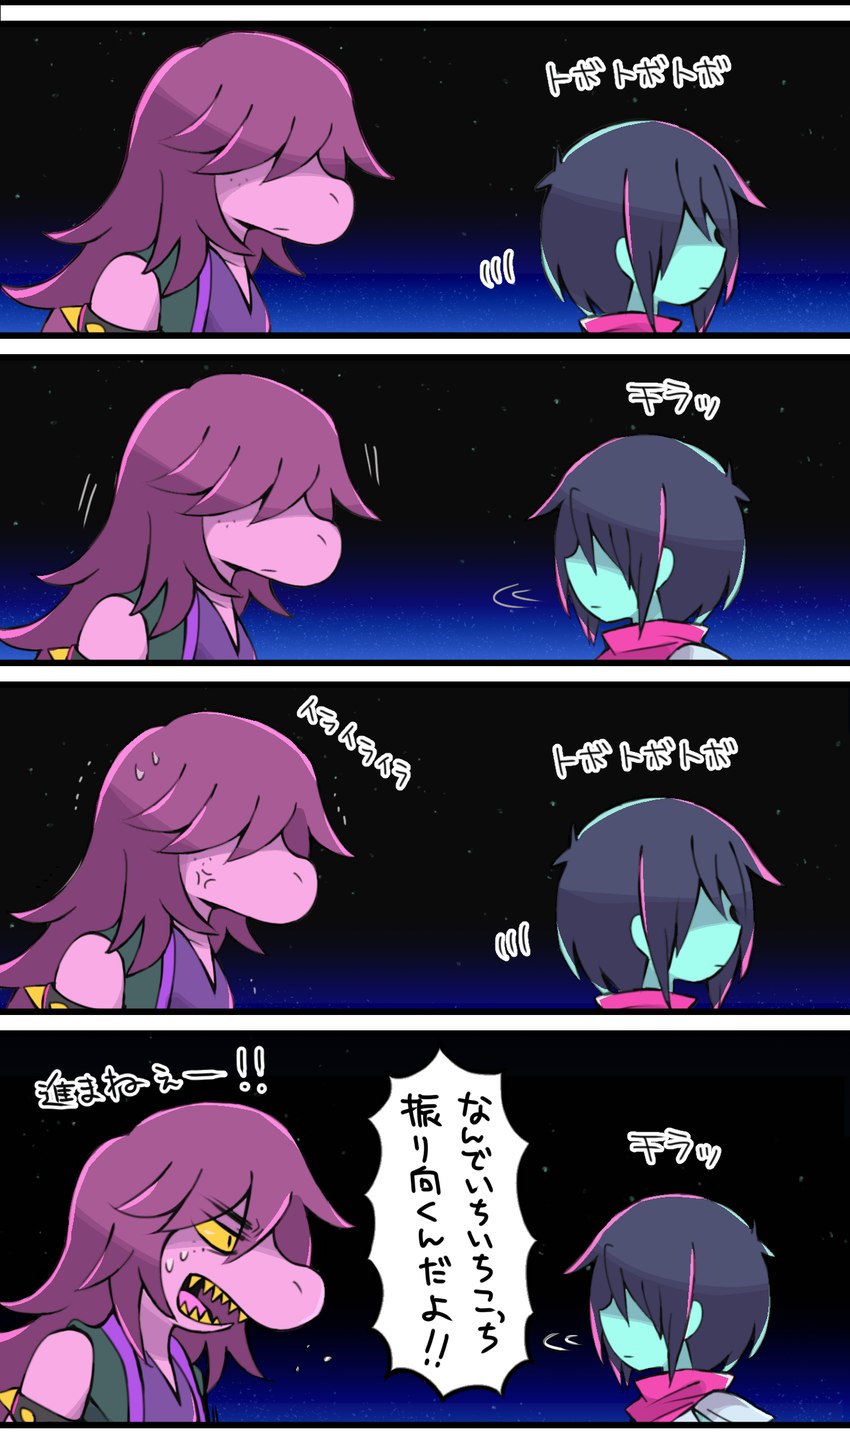 kris and susie (undertale (series) and etc) created by yamame0807